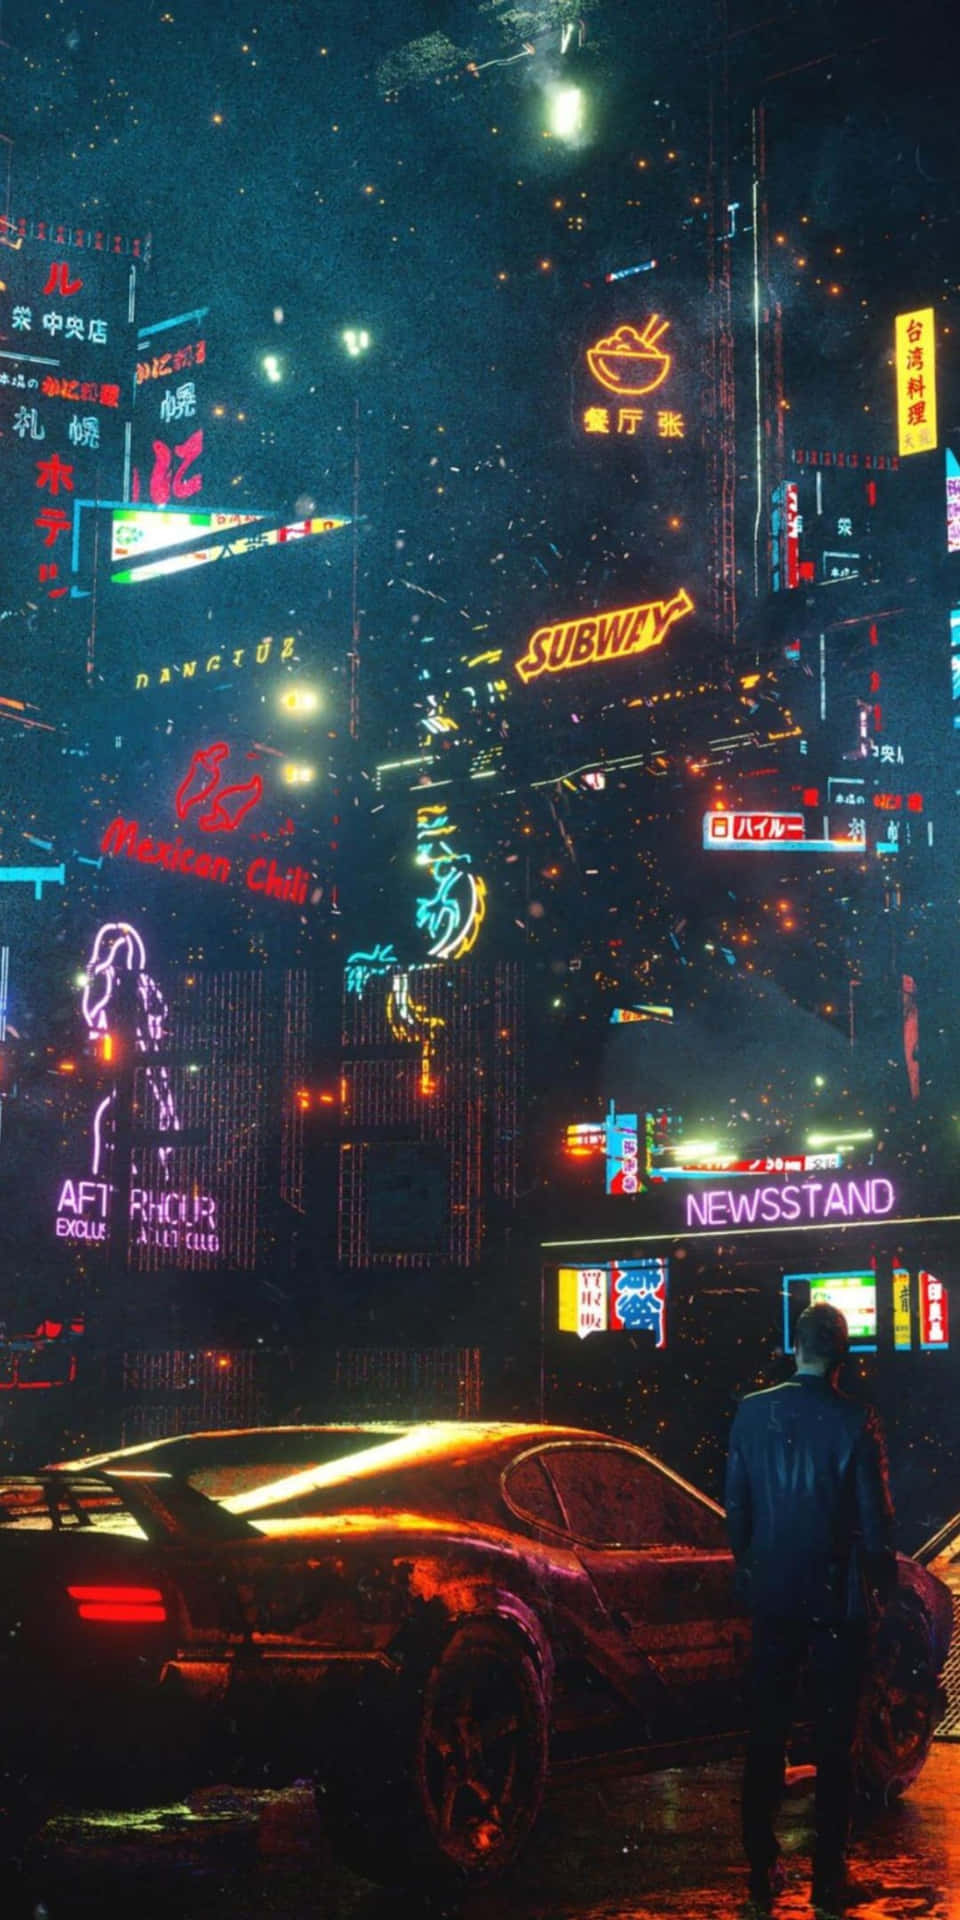 Cyberpunk style in the future with Pixel 3 phone